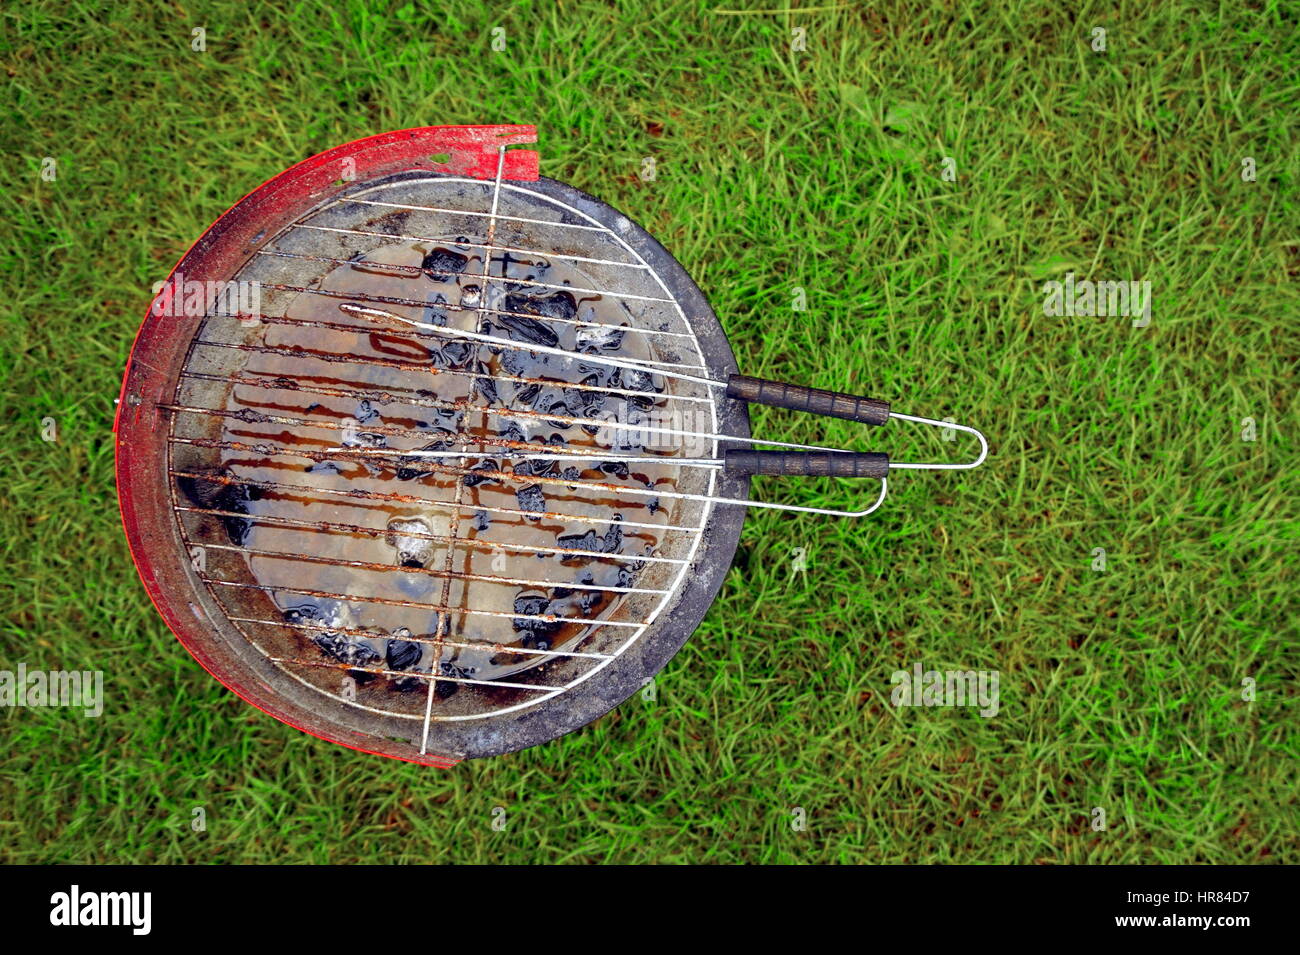 A used barbecue full of rain water Stock Photo